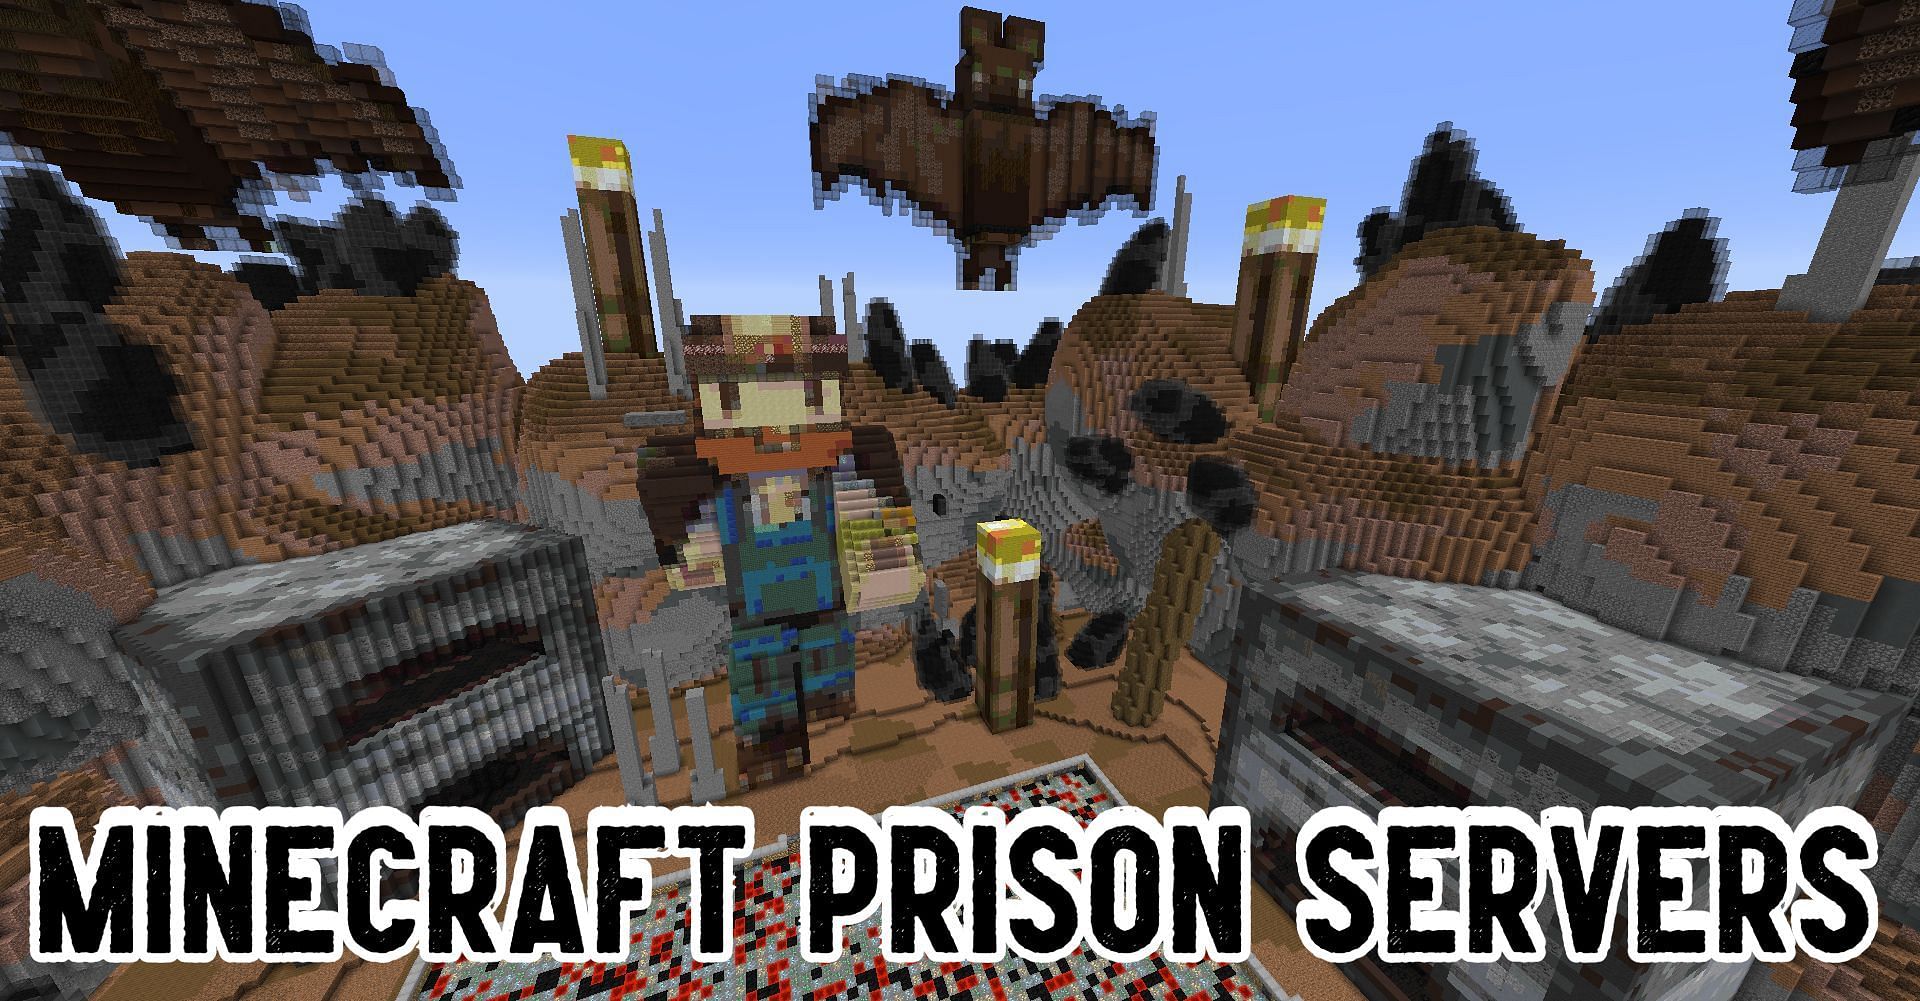 Prison is a popular game mode in Minecraft (Image via Mojang/PurplePrison)